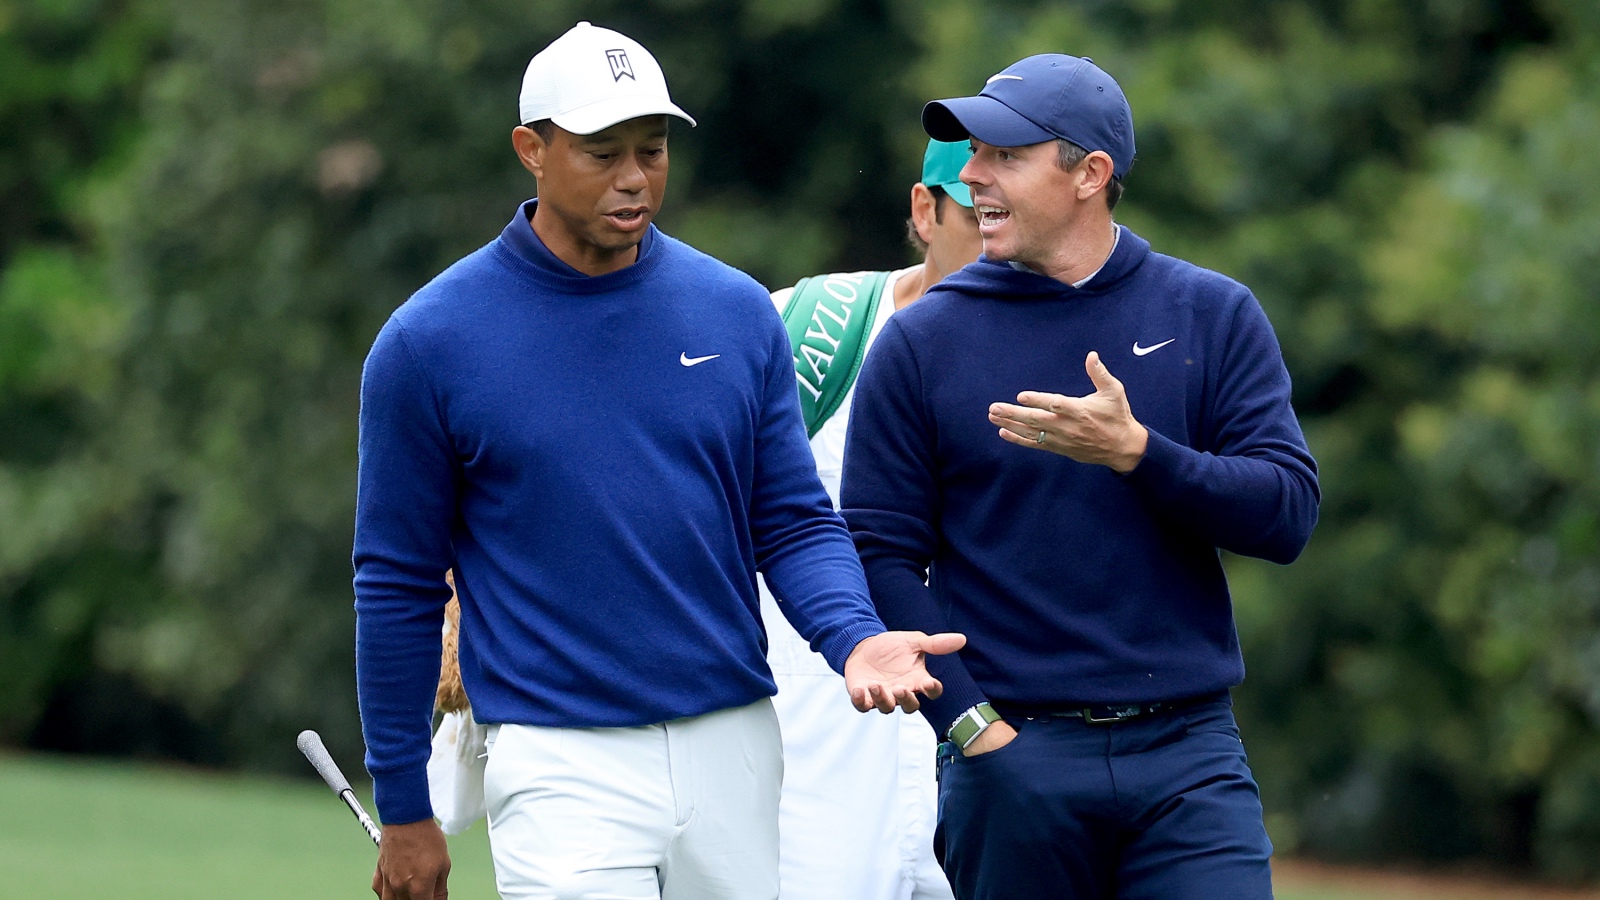 Documents Reveal LIV Golf-PGA Plans For Tiger Woods And Rory